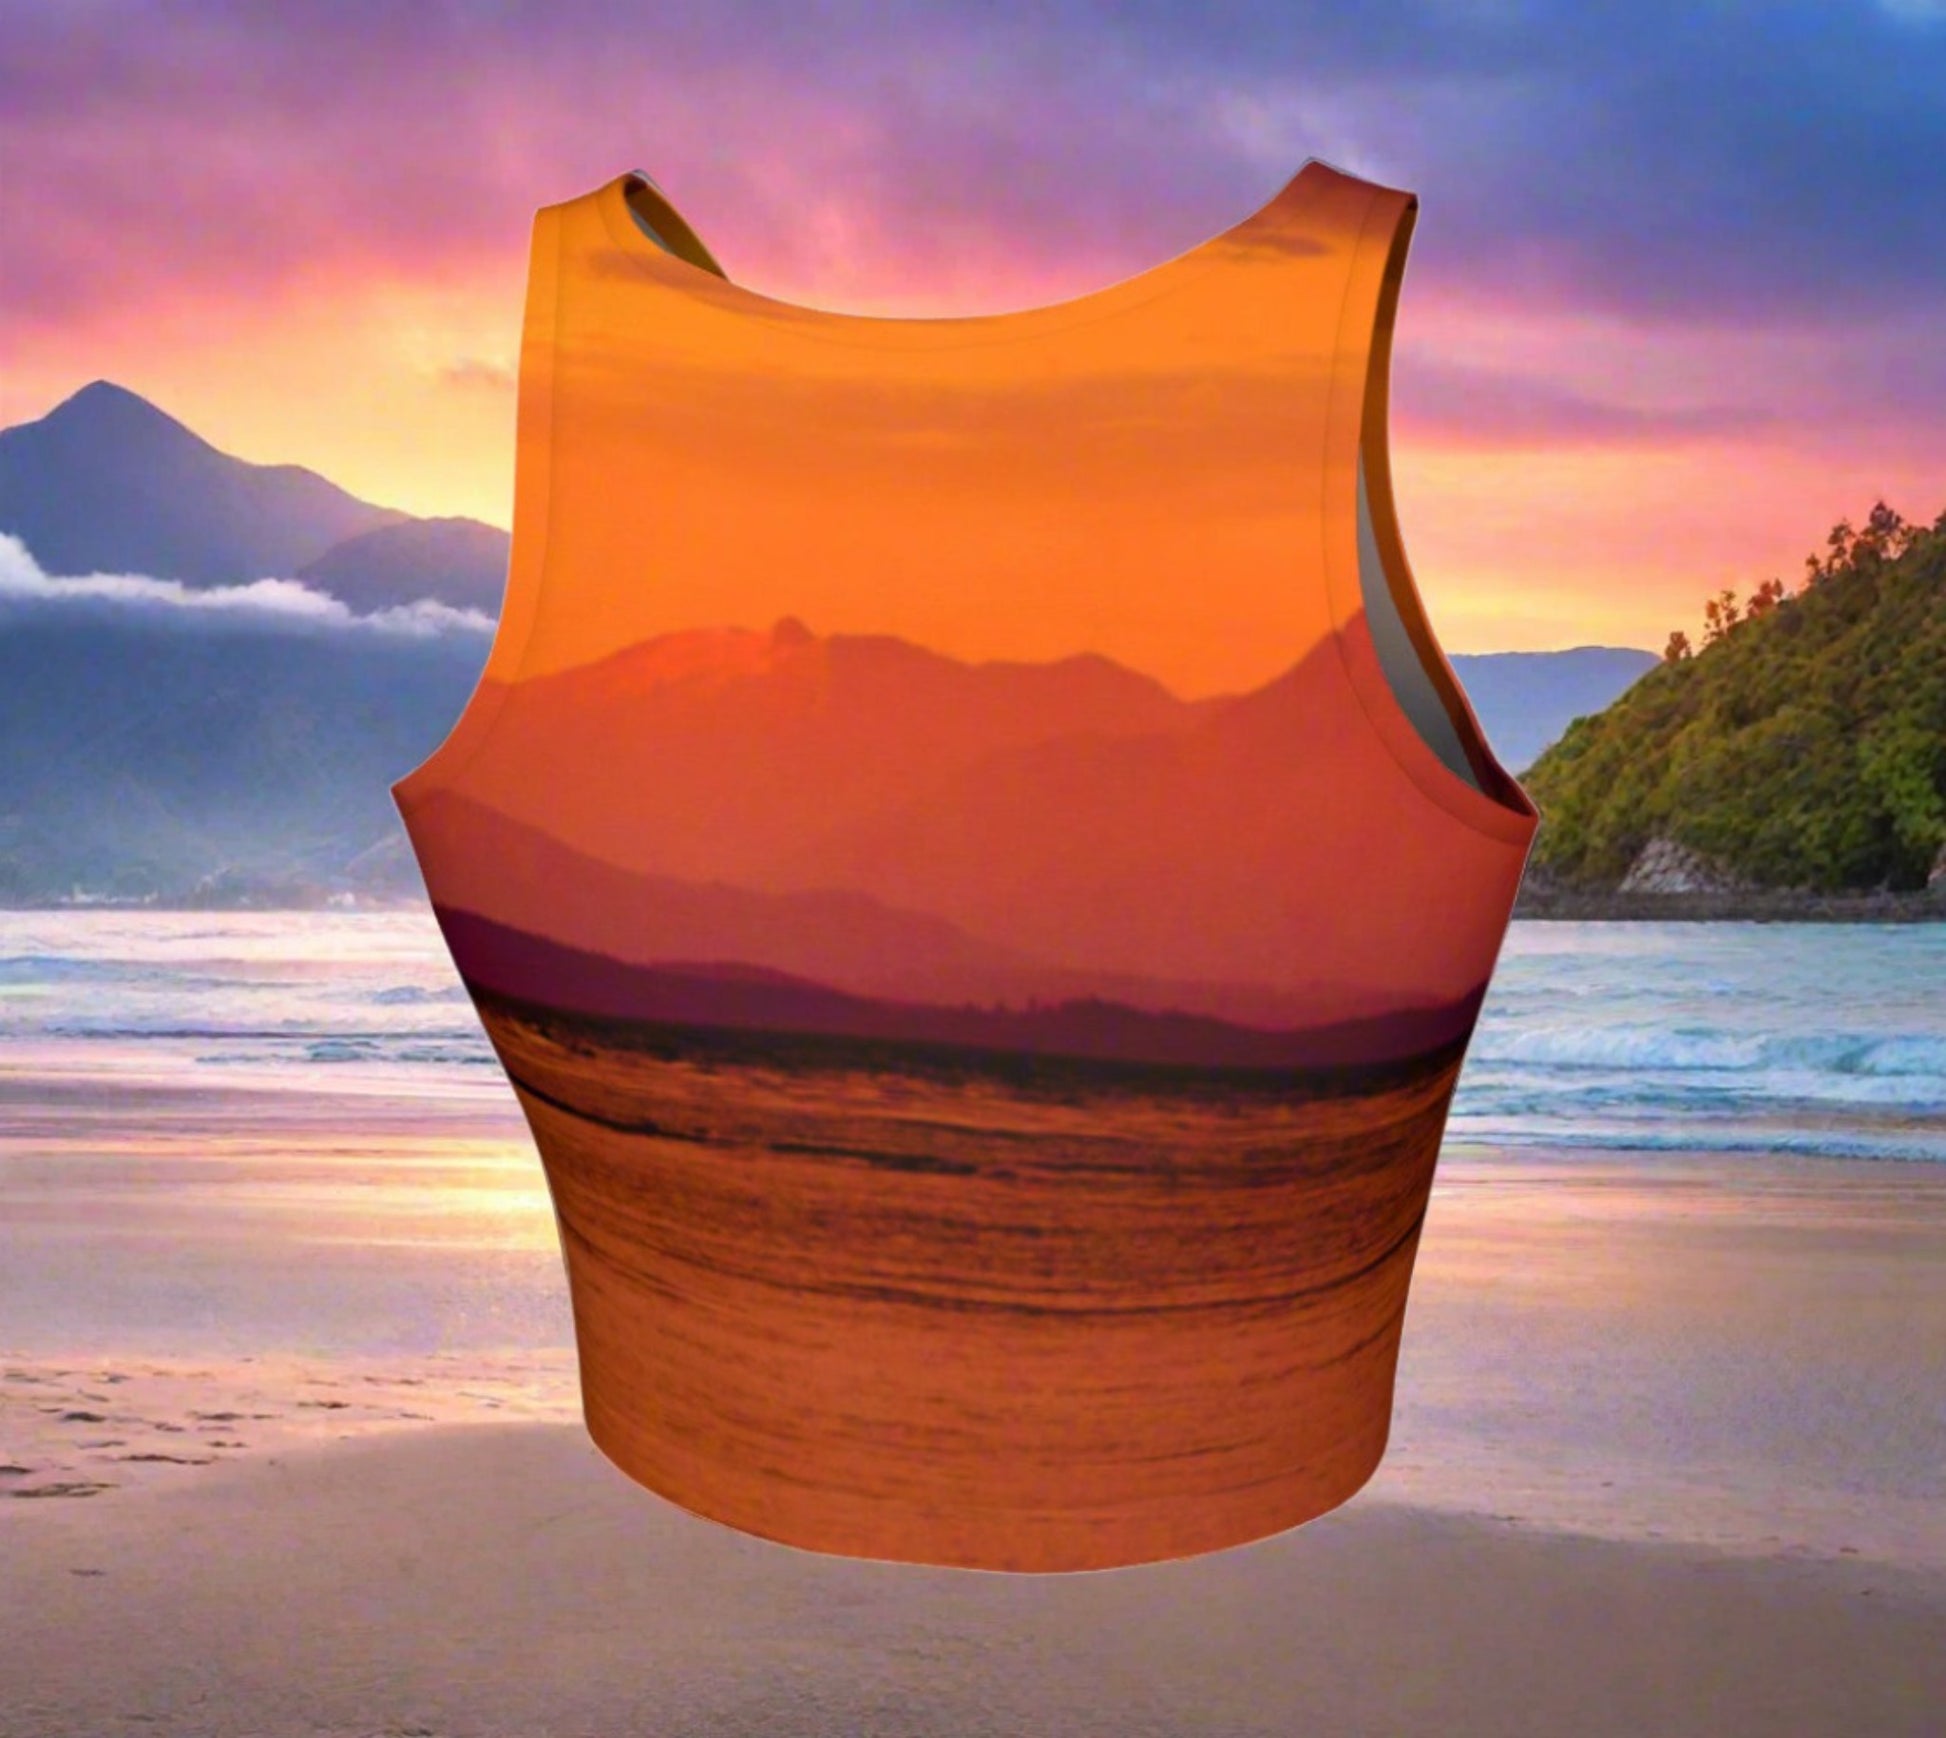 Saratoga Sunset Athletic Crop Top  Saratoga Sunset artwork by Roxy Hurtubise   Made to move with you!  Wear for your daily workouts, yoga, beach volleyball or as a bathing suit top!  Your Van Isle Goddess athletic crop top pairs up with our yoga or classic leggings and capris. Crop tops also look great with shorts, mini shorts, skirts fitted or flared.